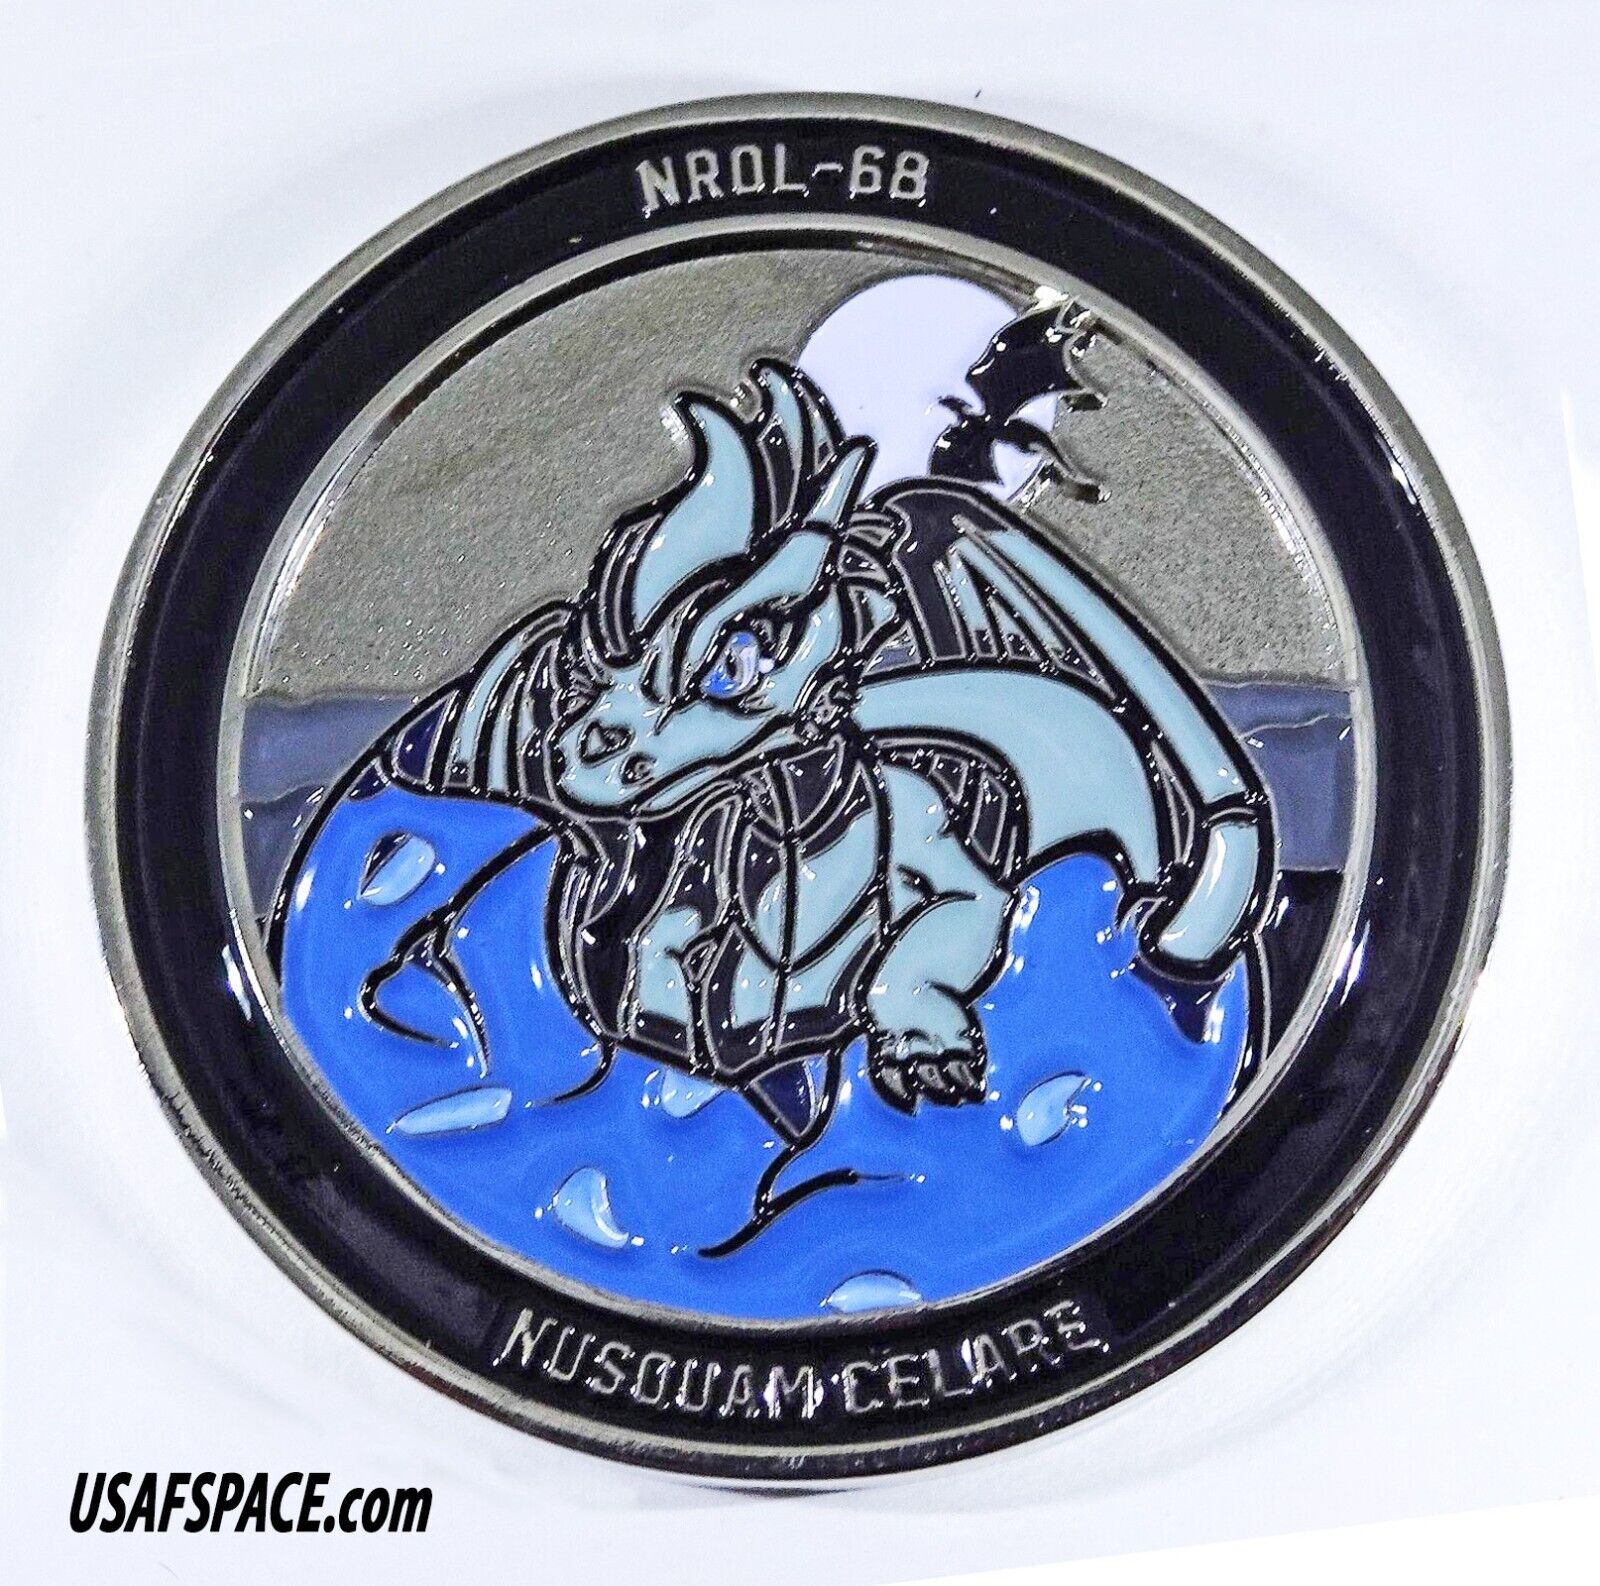 Authentic NROL-68-DELTA IV-H-ULA USSF DOD NRO Classified SATELLITE Mission COIN